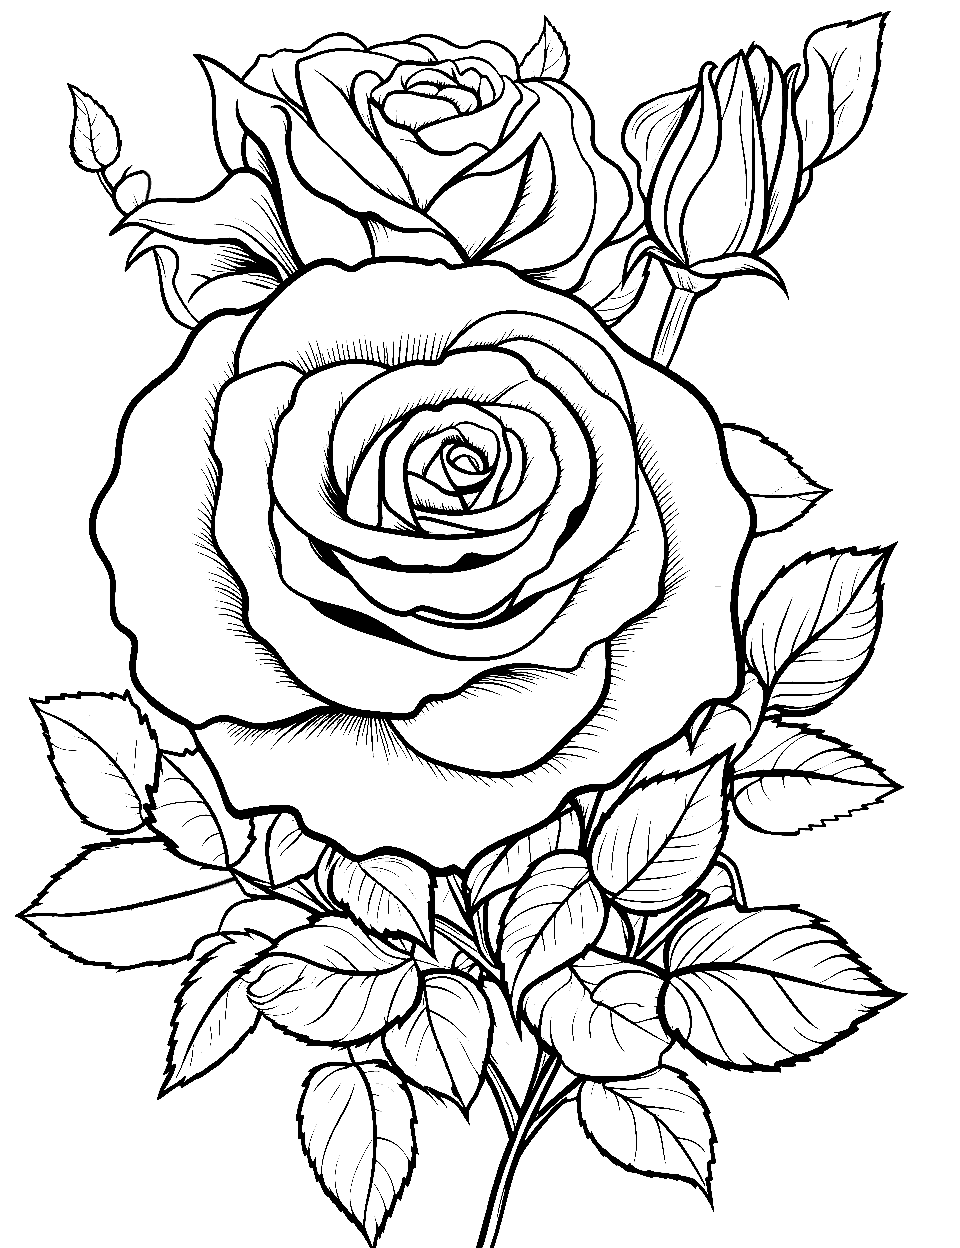 Beautiful Roses Coloring Page - A sprawling space filled with various types of blooming roses.